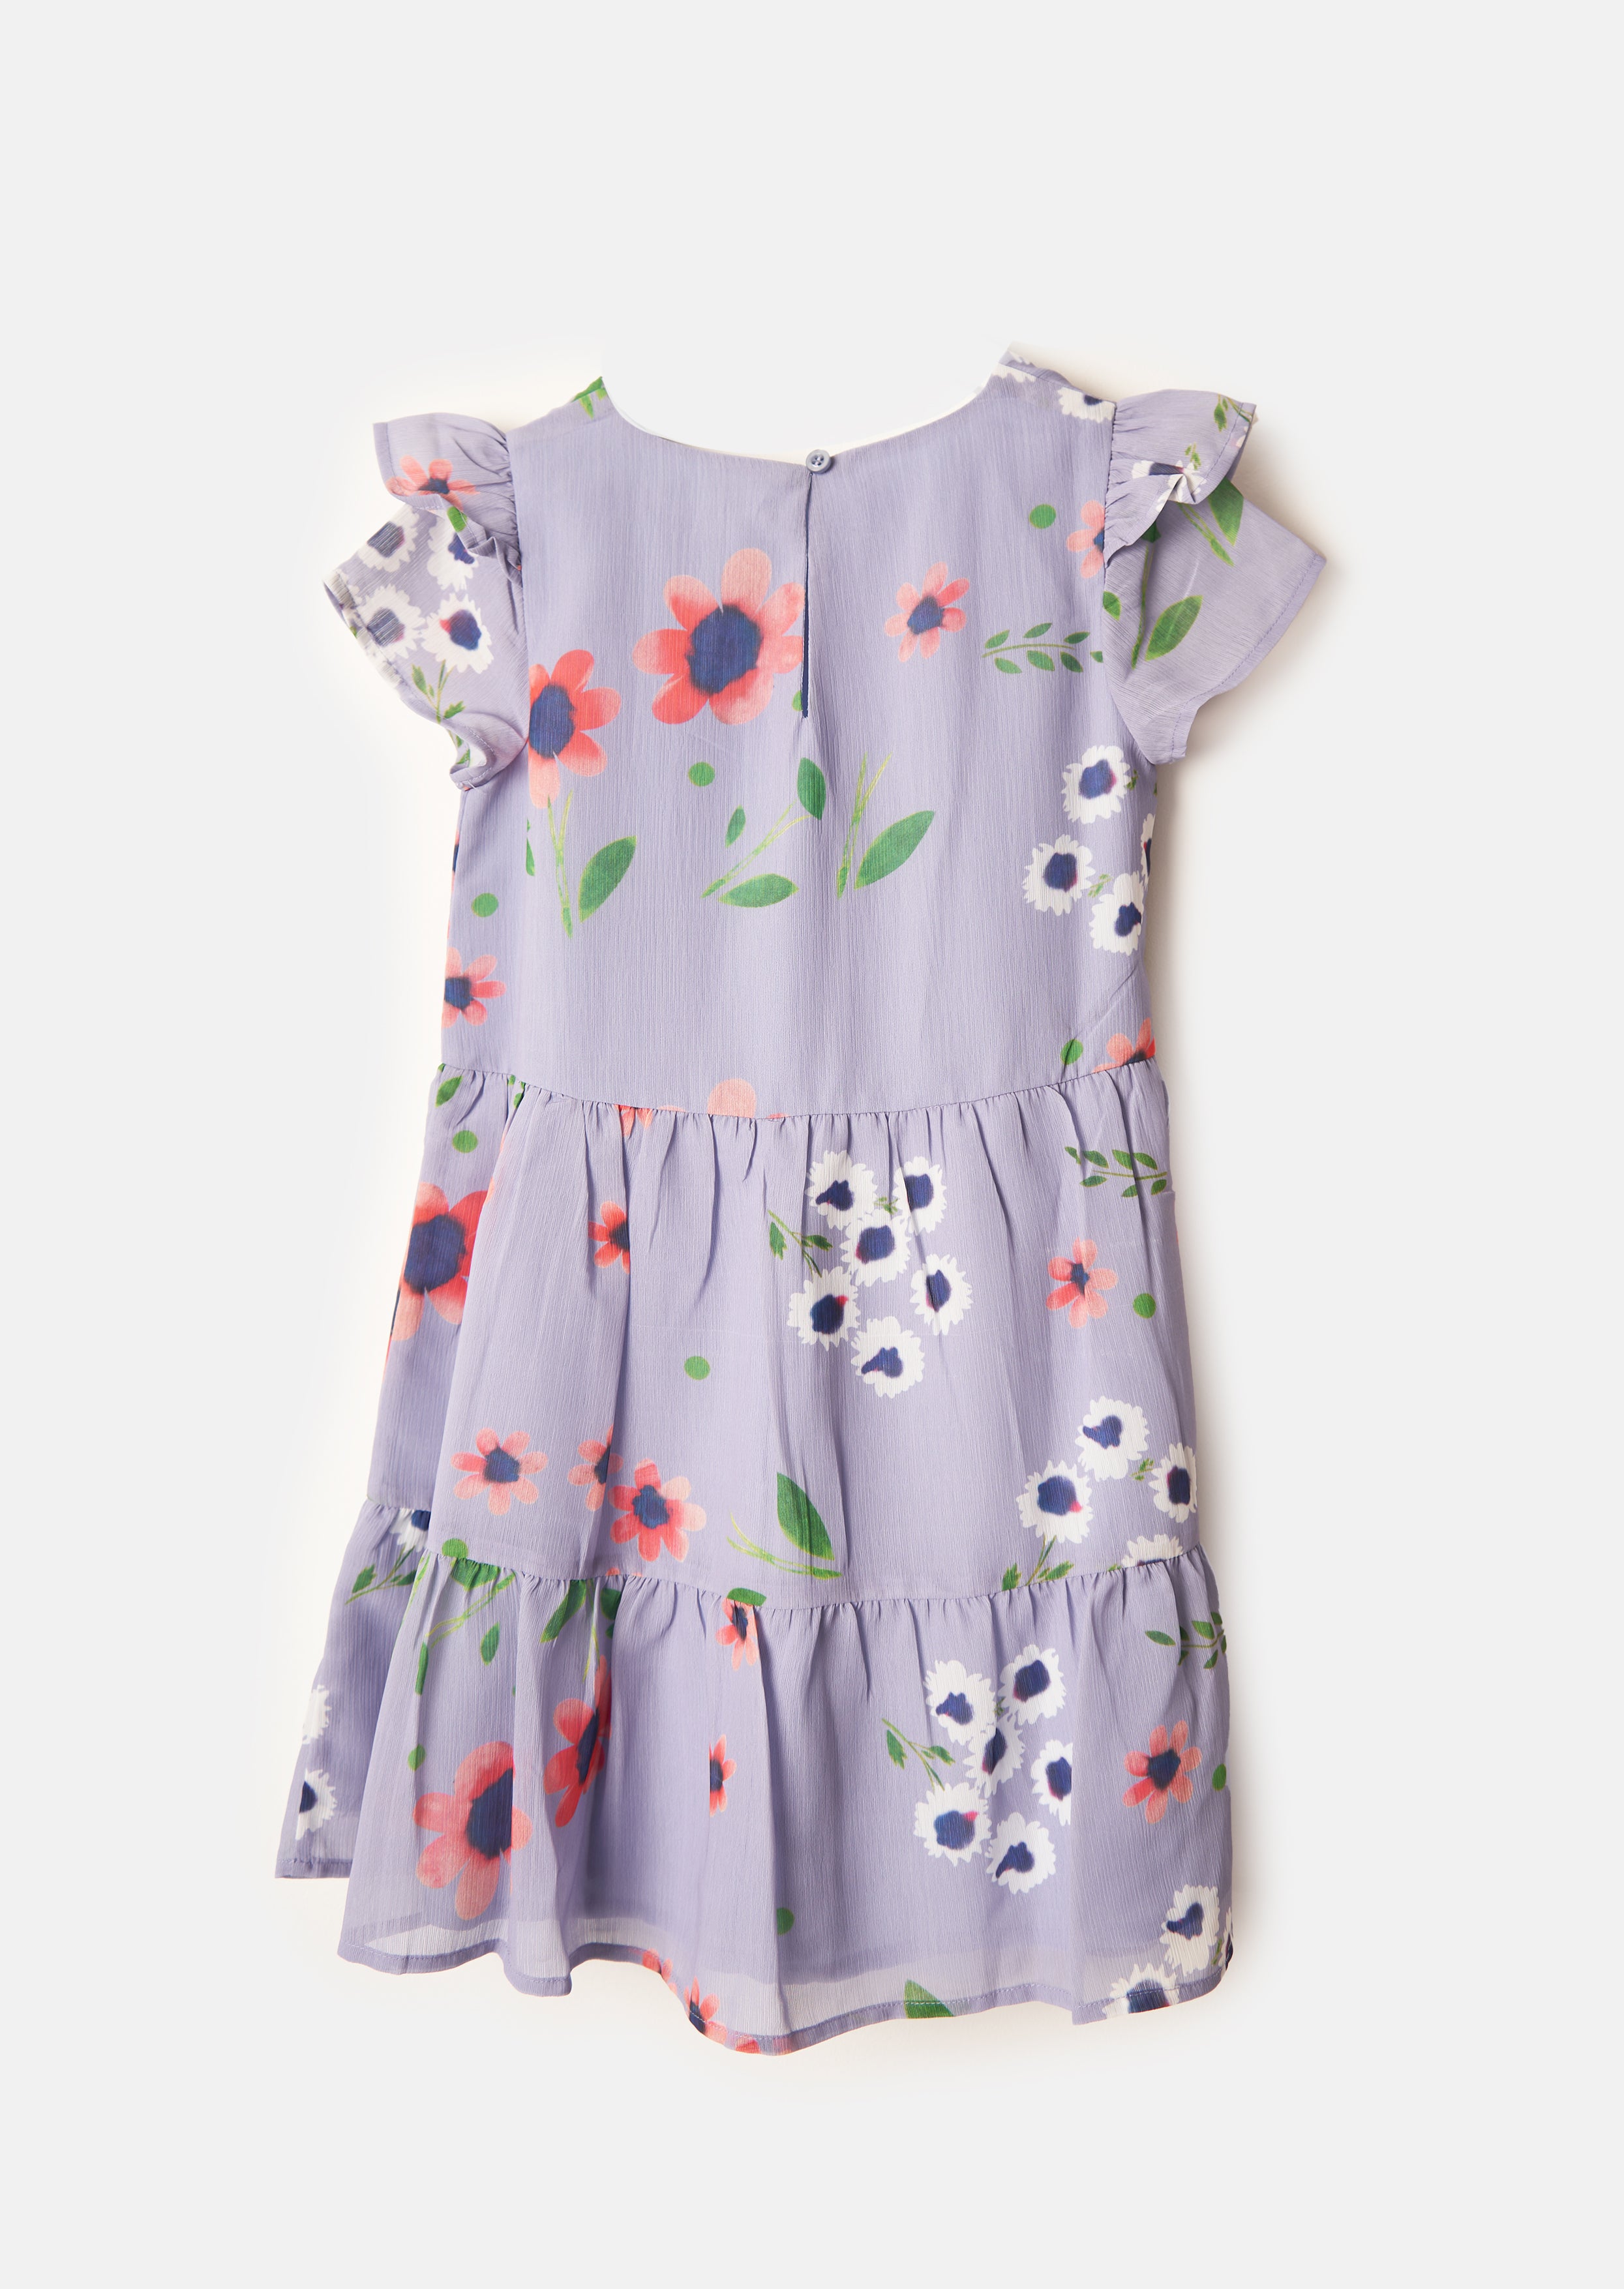 Girls Floral Printed Woven Blue Dress